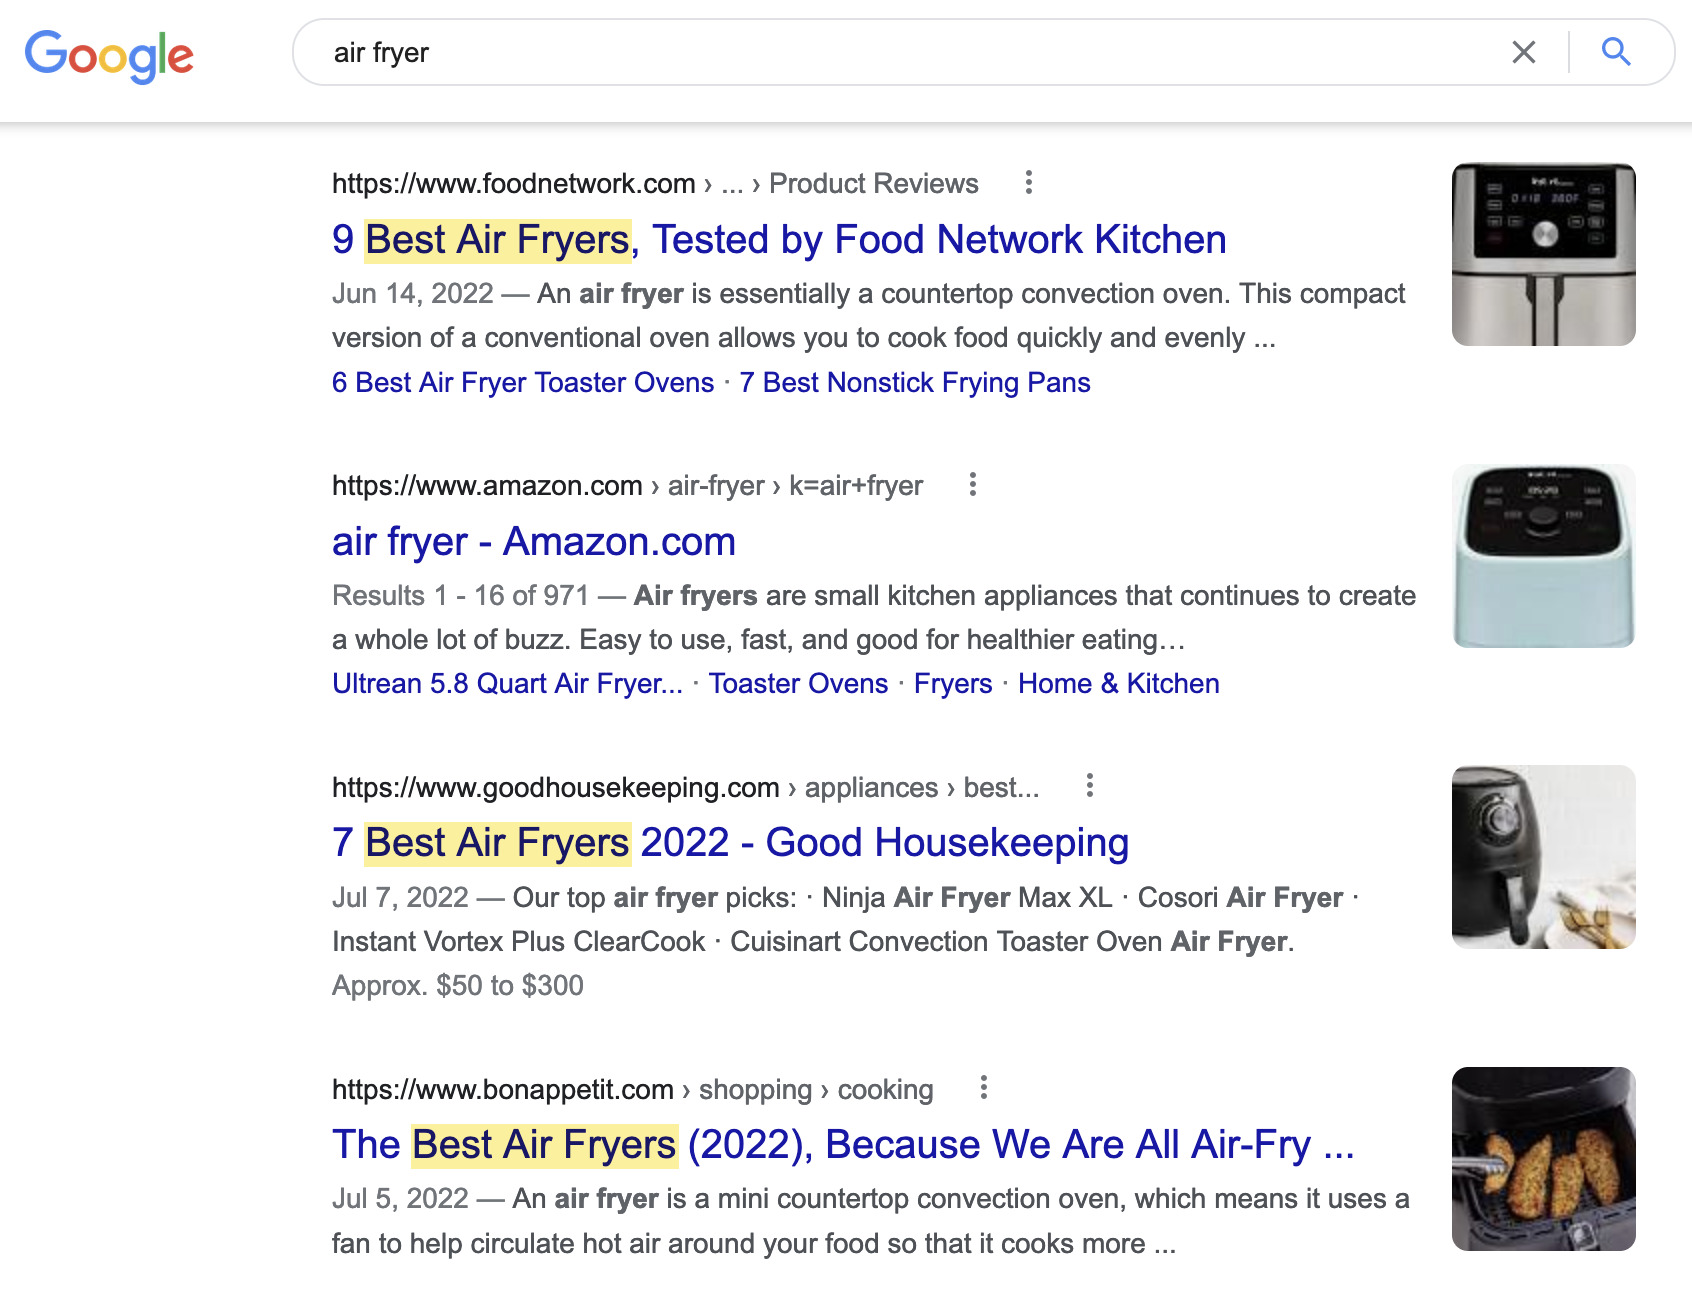 People searching for "air fryer" are looking to compare products, not buy
